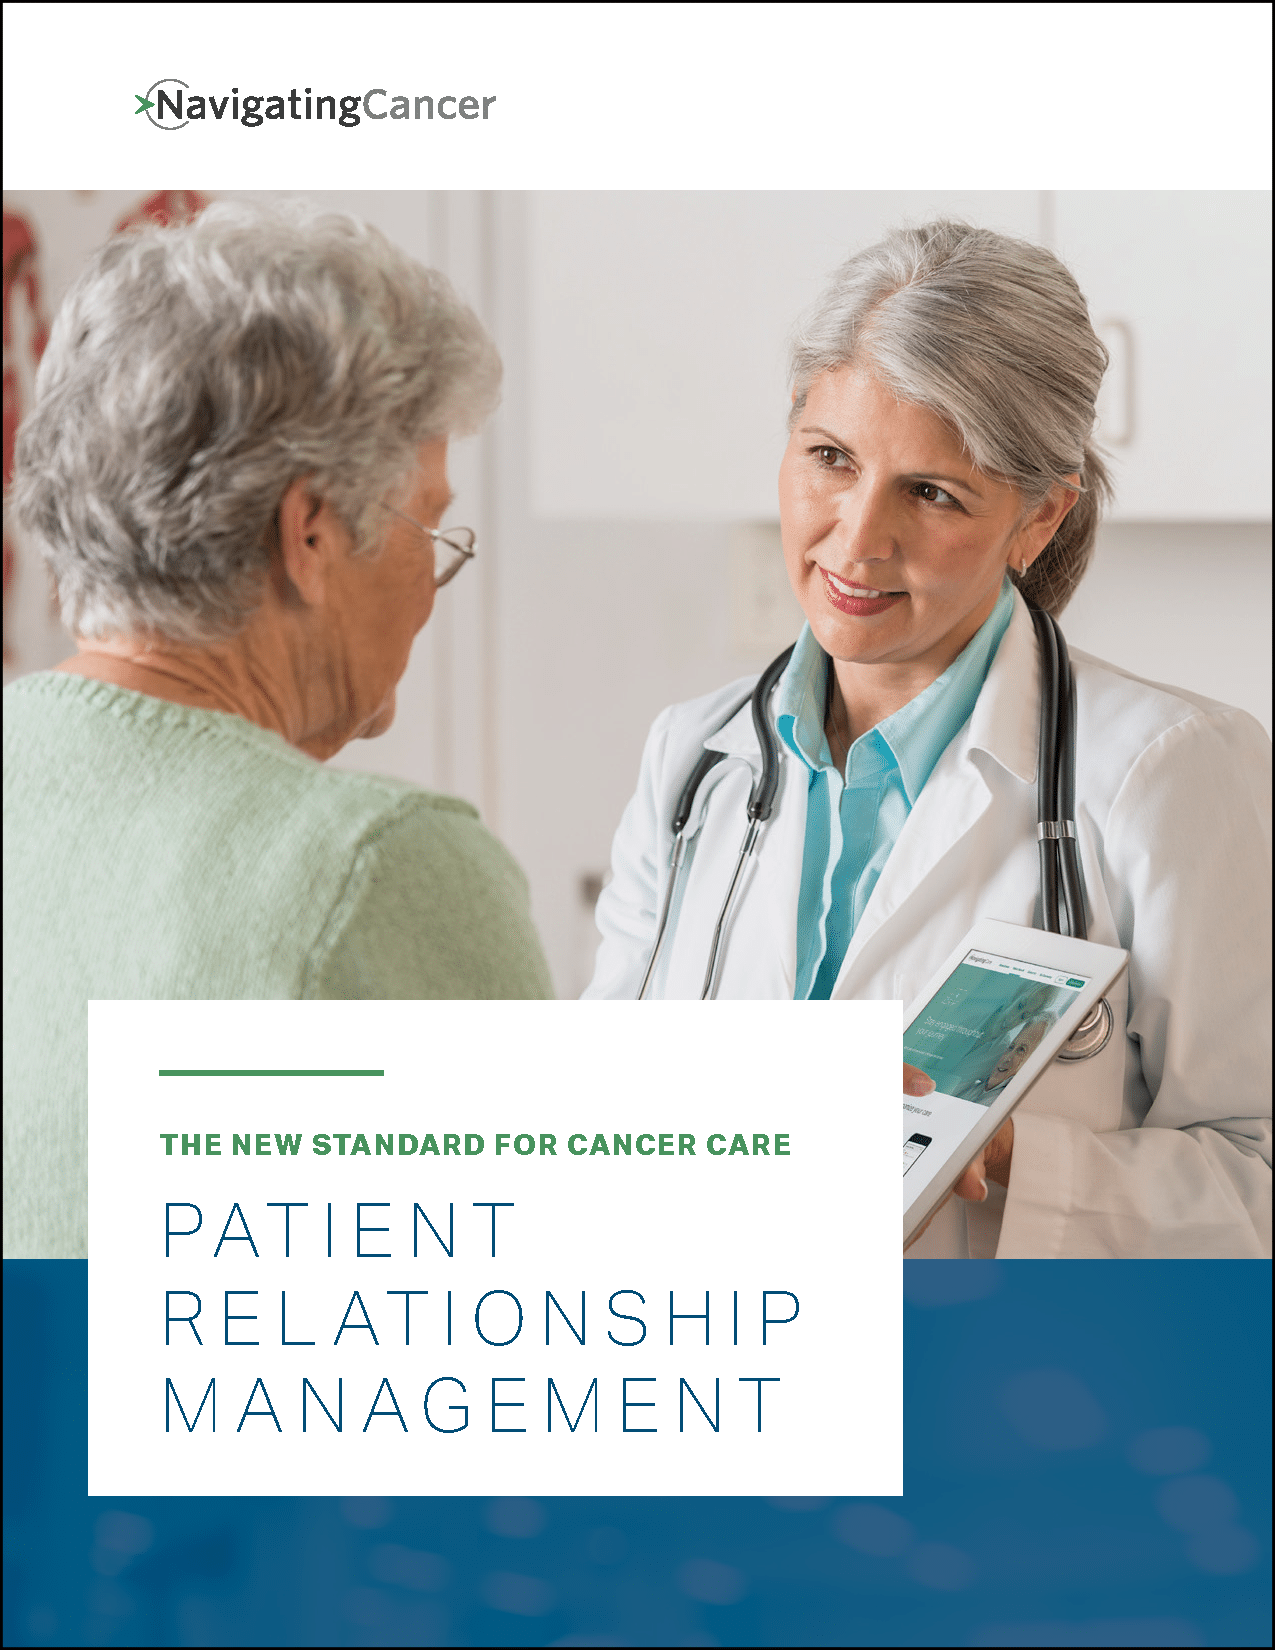 eBook: Introduction to Patient Relationship Management